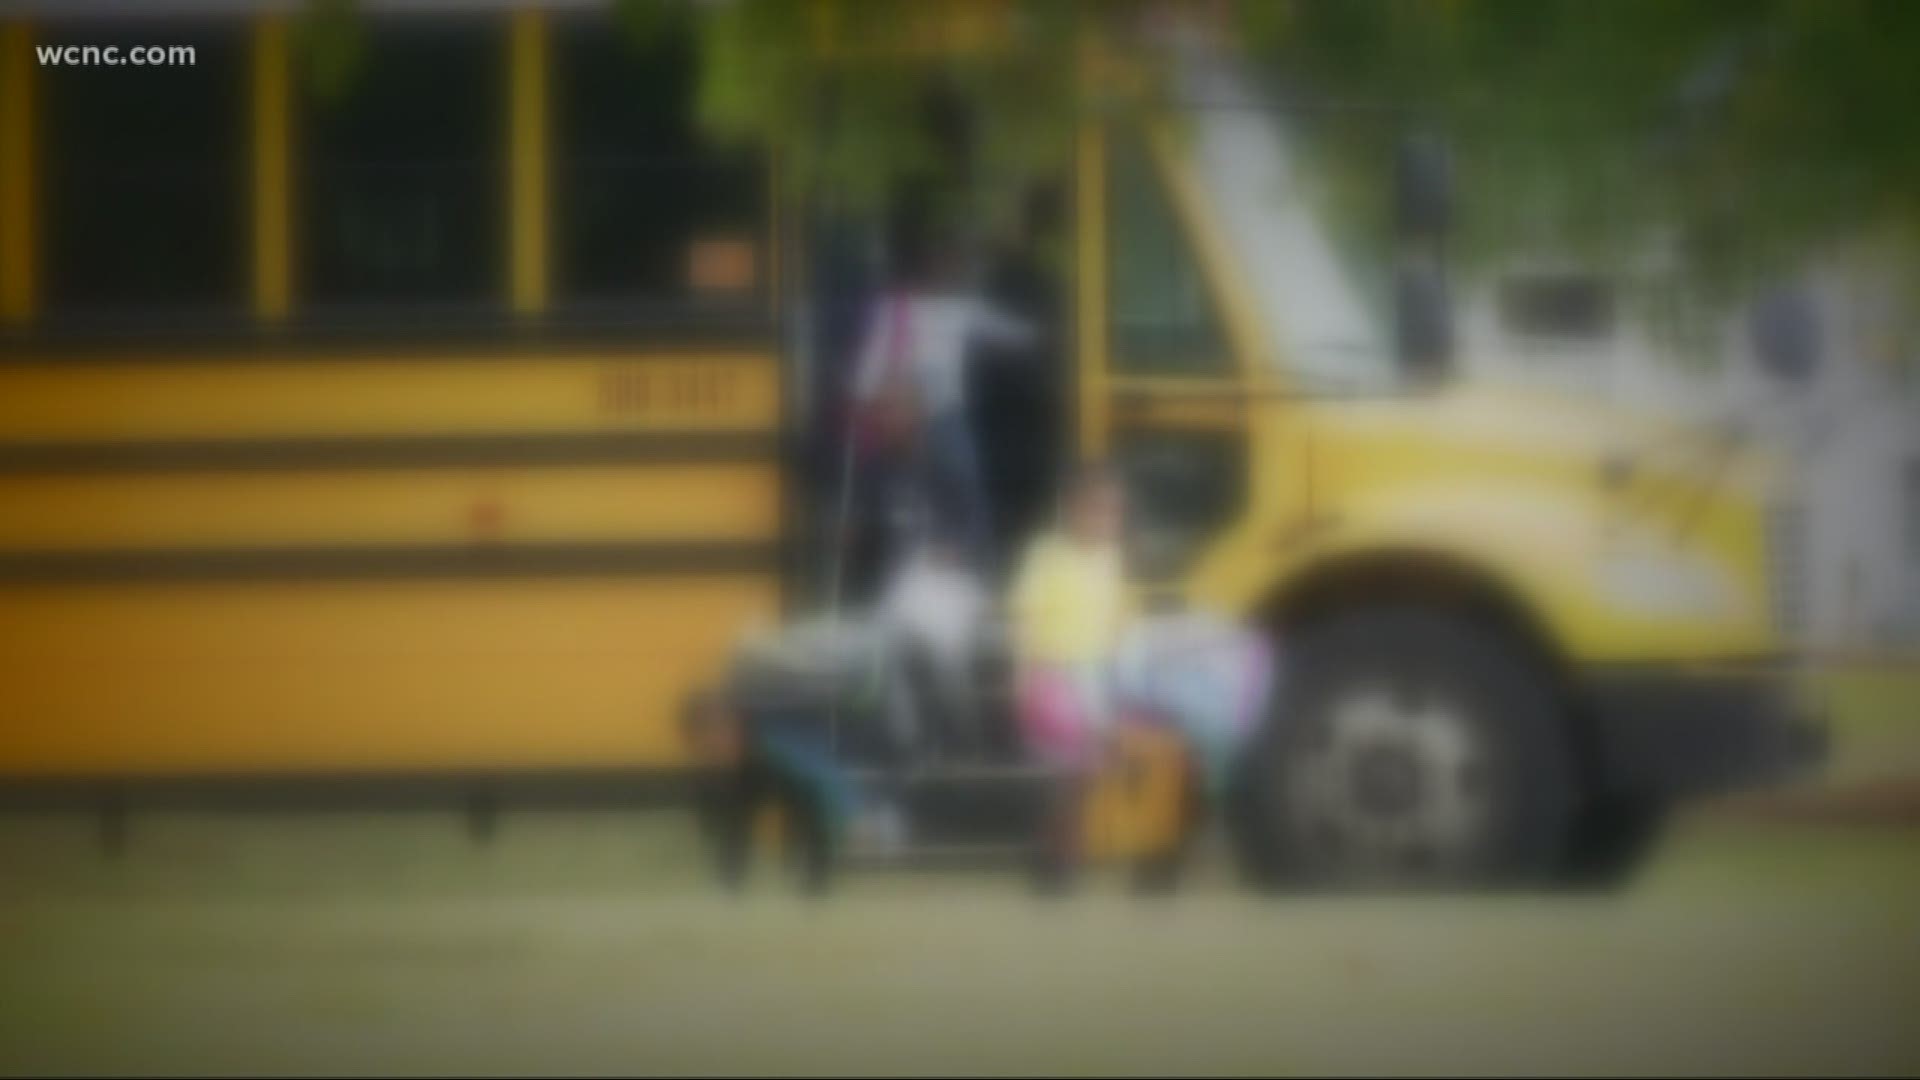 Police said the unknown man grabbed one of the girls by their backpacks as they were walking home from school on Tuesday.